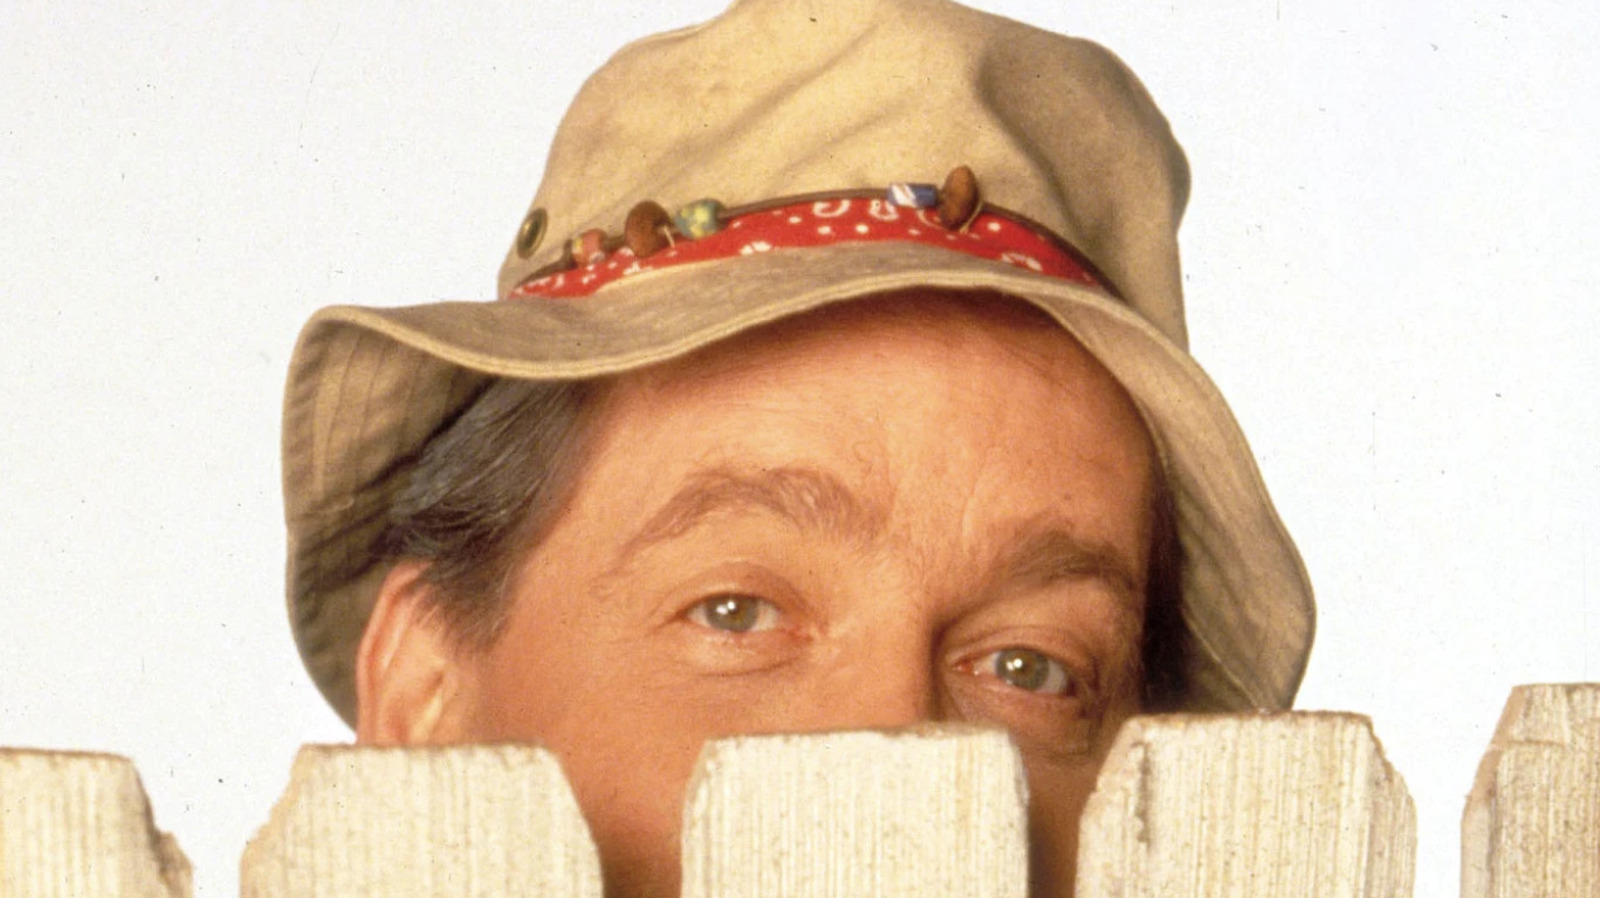 Home Improvement,' 'Friends' & More Cast Reunions Coming to TV